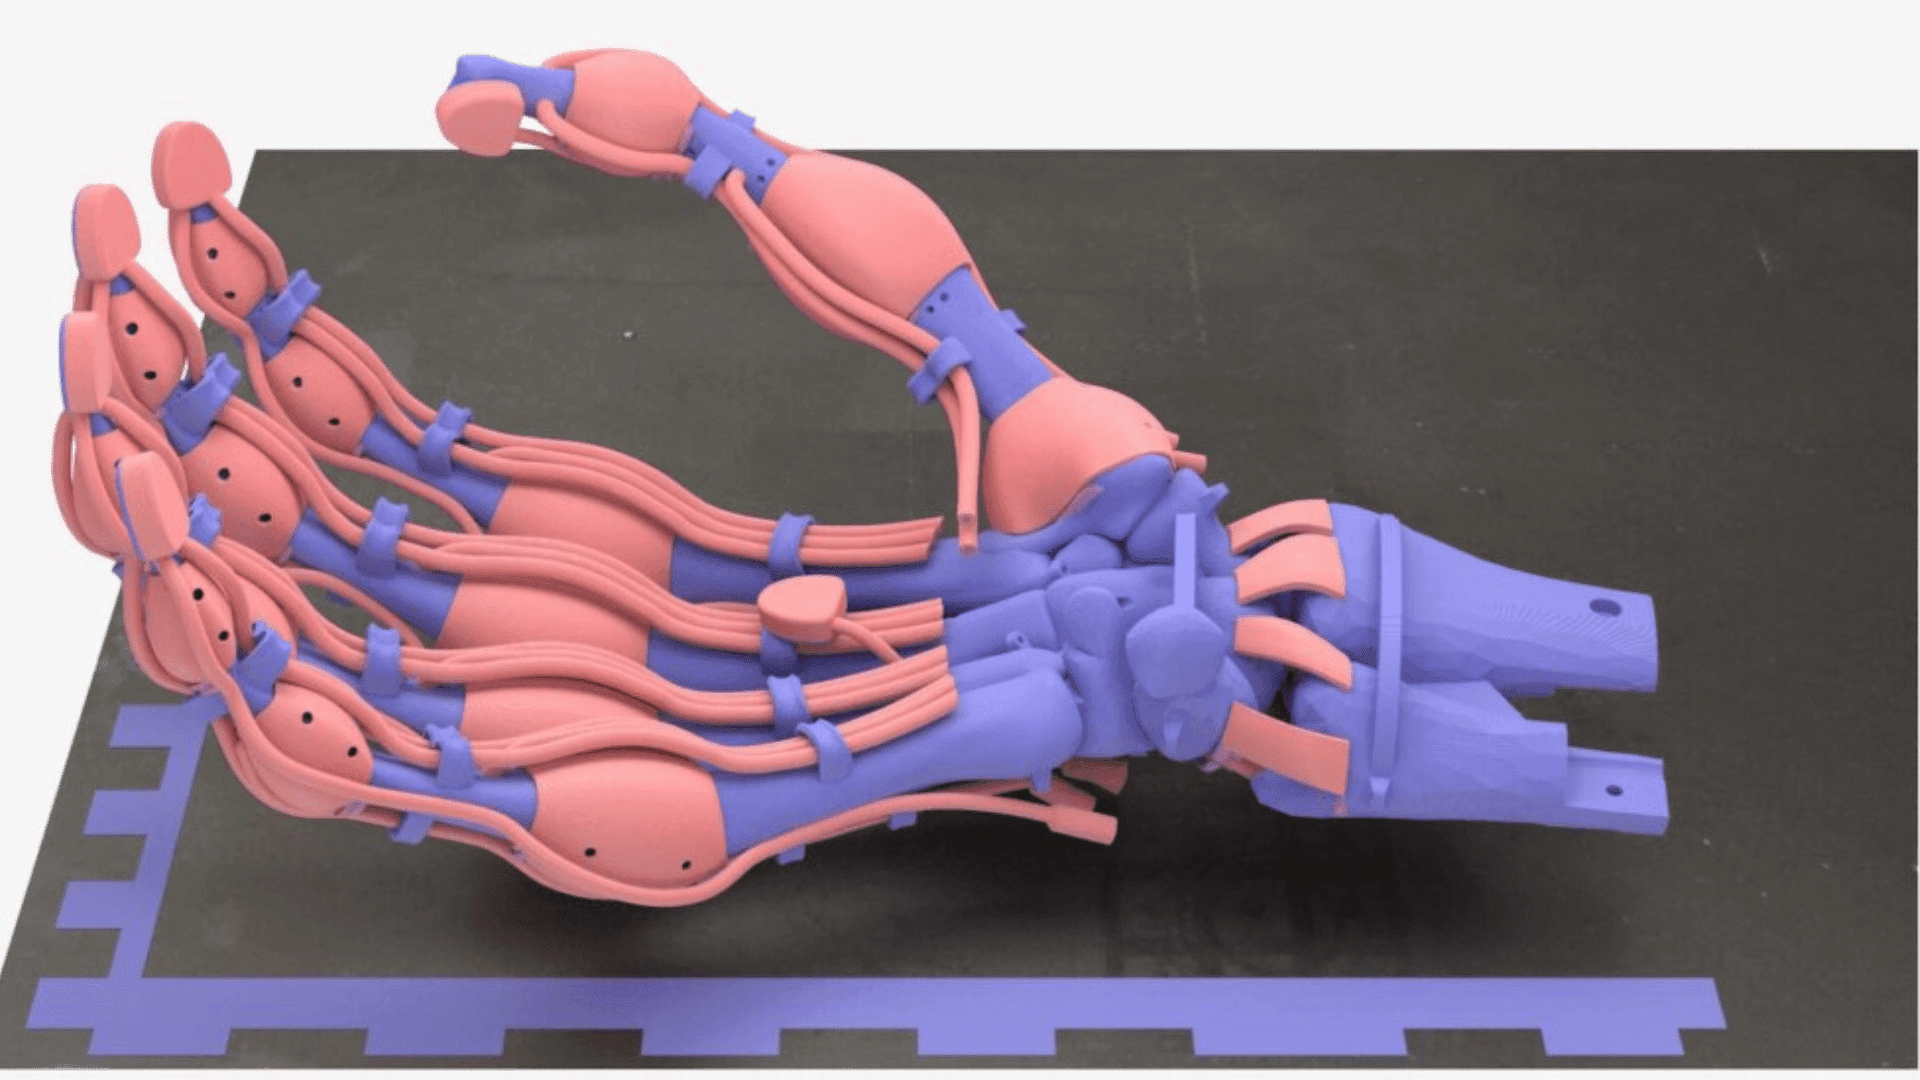 Researchers 3D Printed Hand with Ligaments ETH Zurich : SWNS